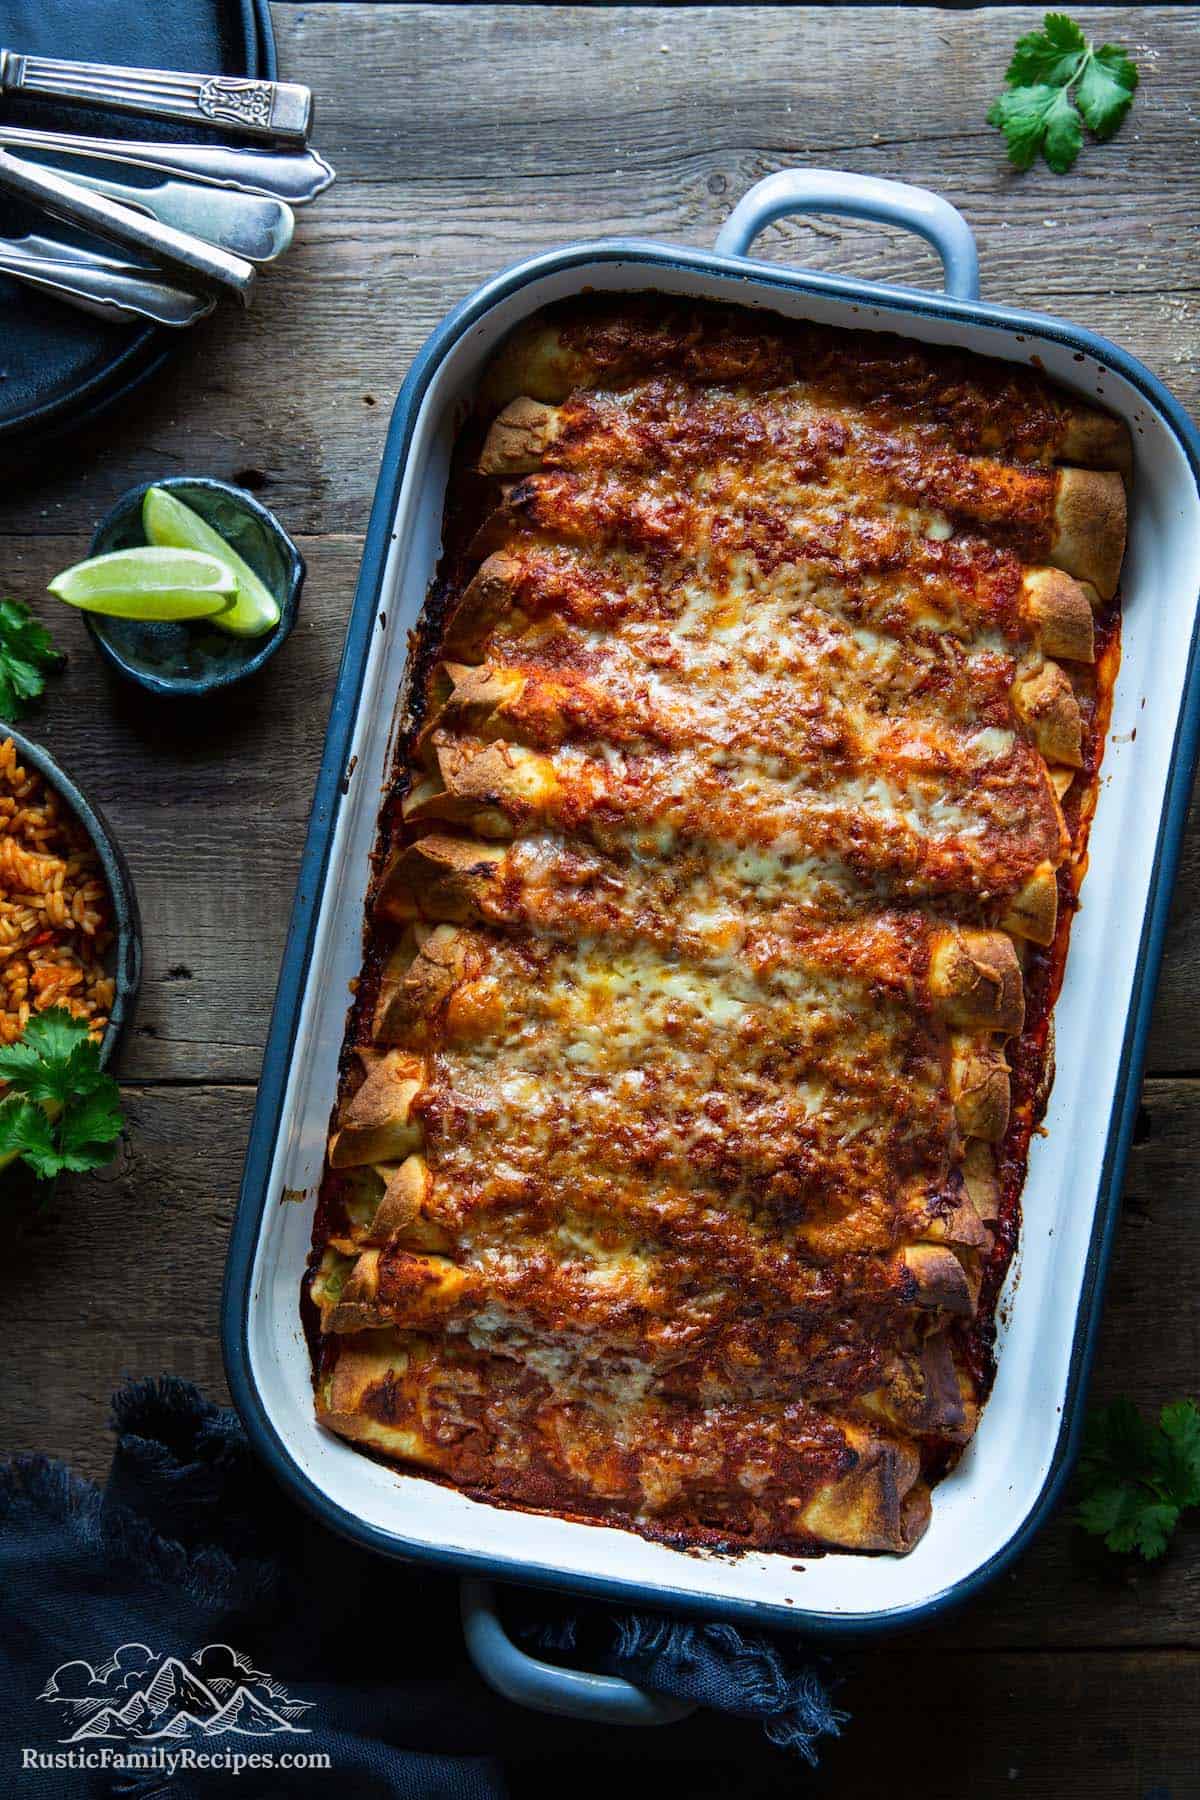 A casserole dish with baked enchiladas